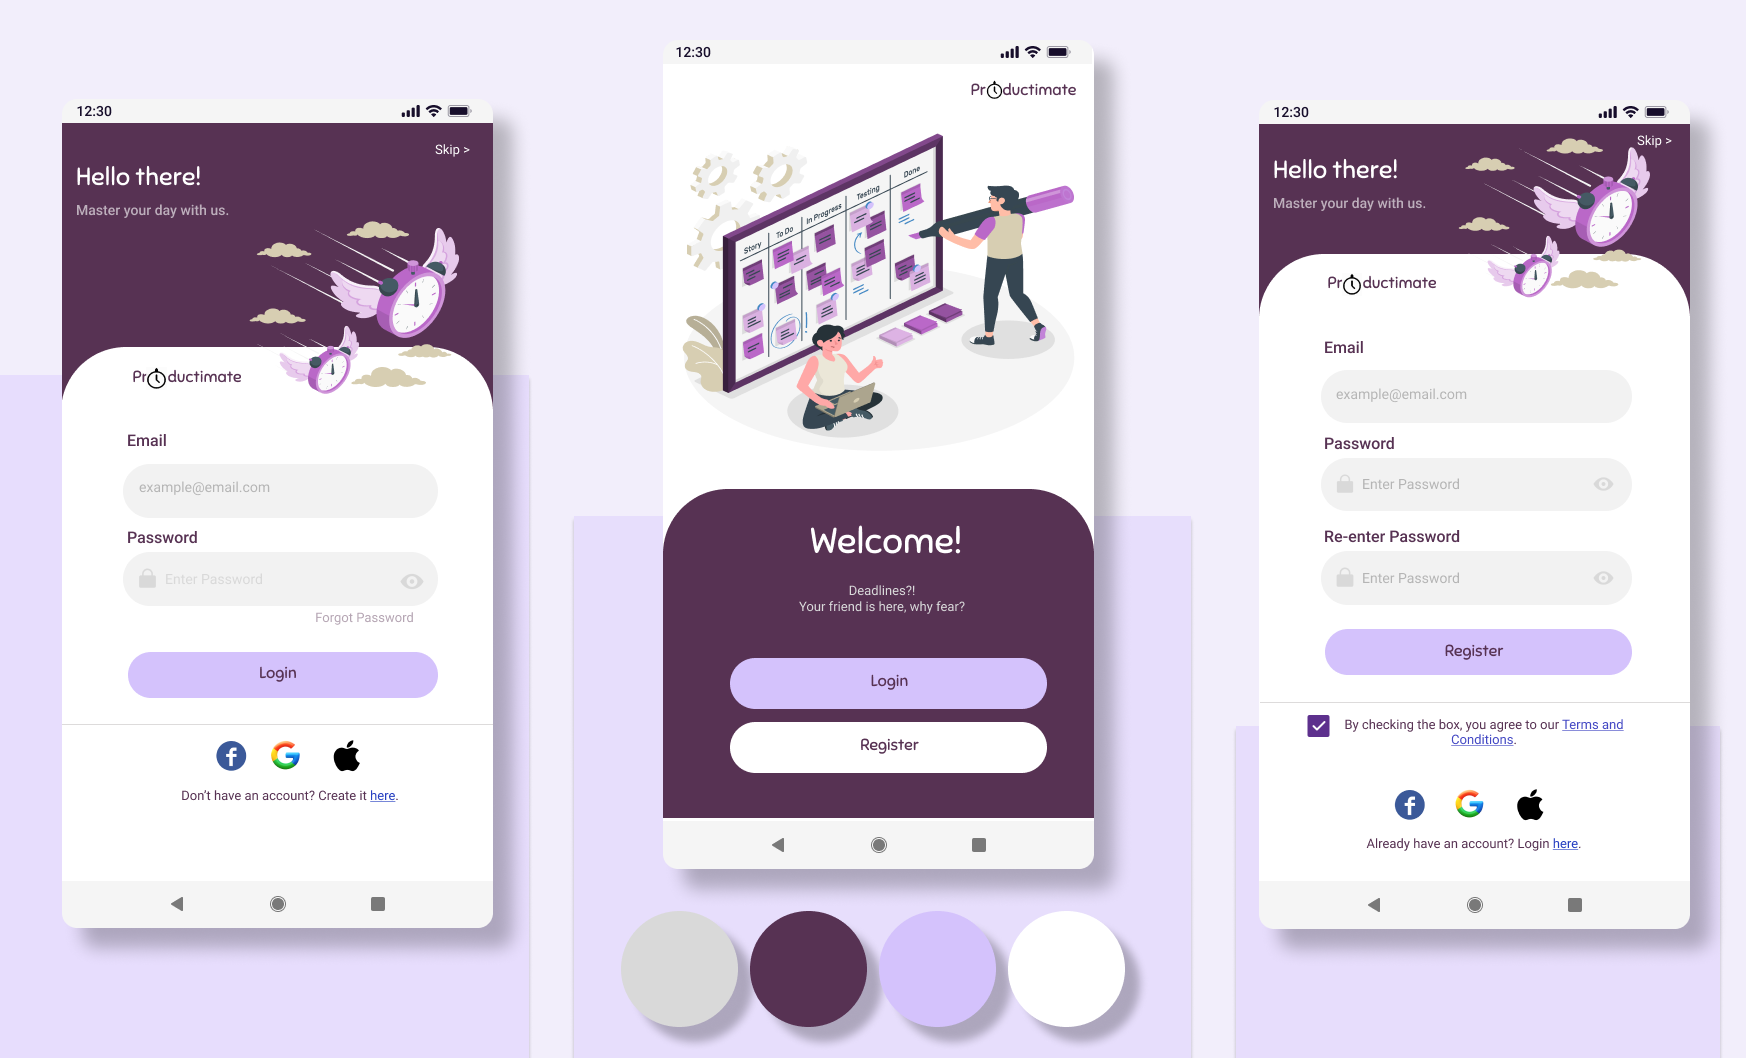 Daily UI #001 - TFT Survivor Bootcamp Sign-Up by airah on Dribbble